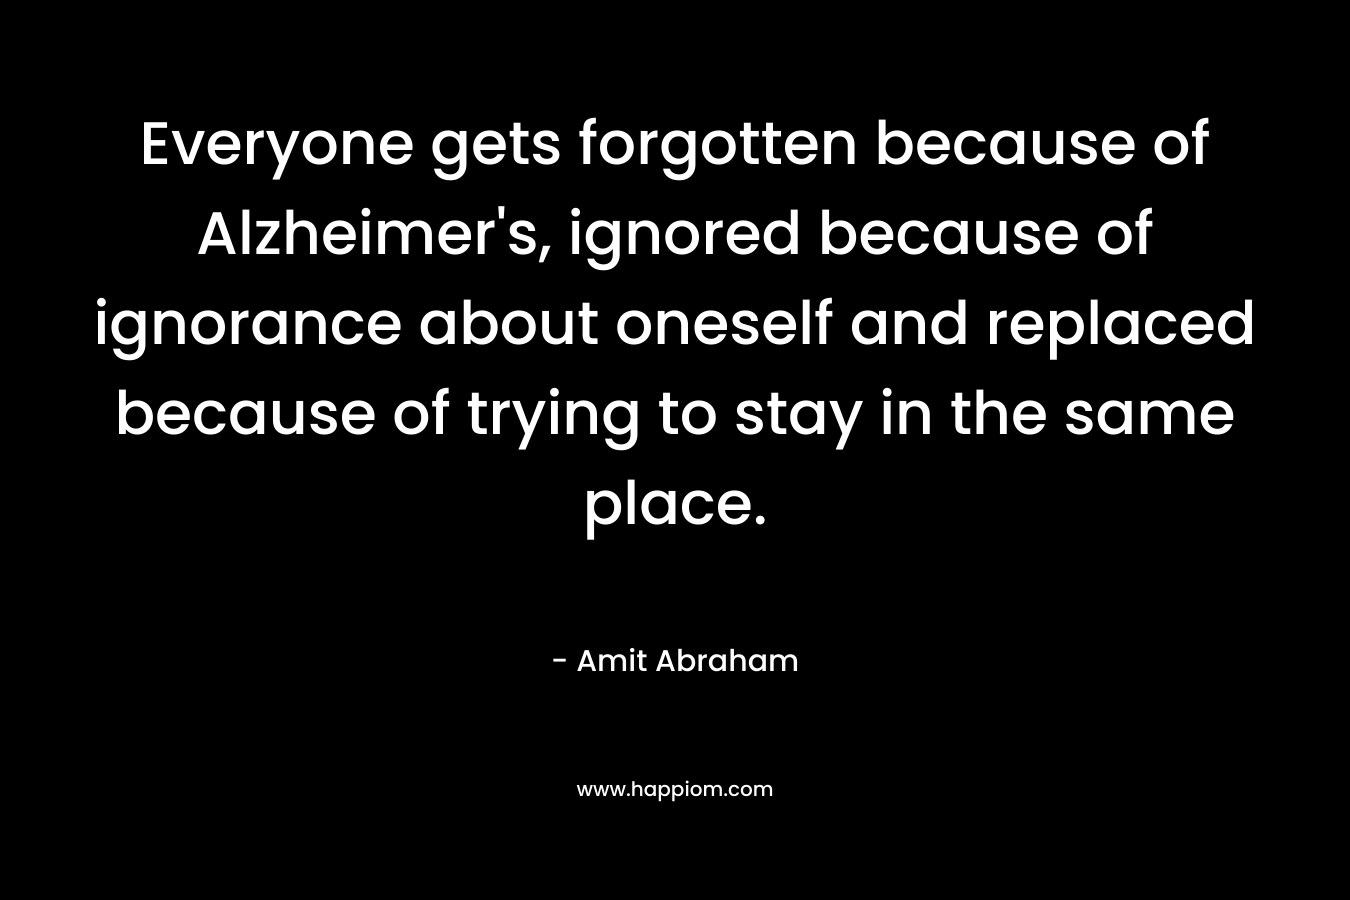 Everyone gets forgotten because of Alzheimer’s, ignored because of ignorance about oneself and replaced because of trying to stay in the same place. – Amit Abraham